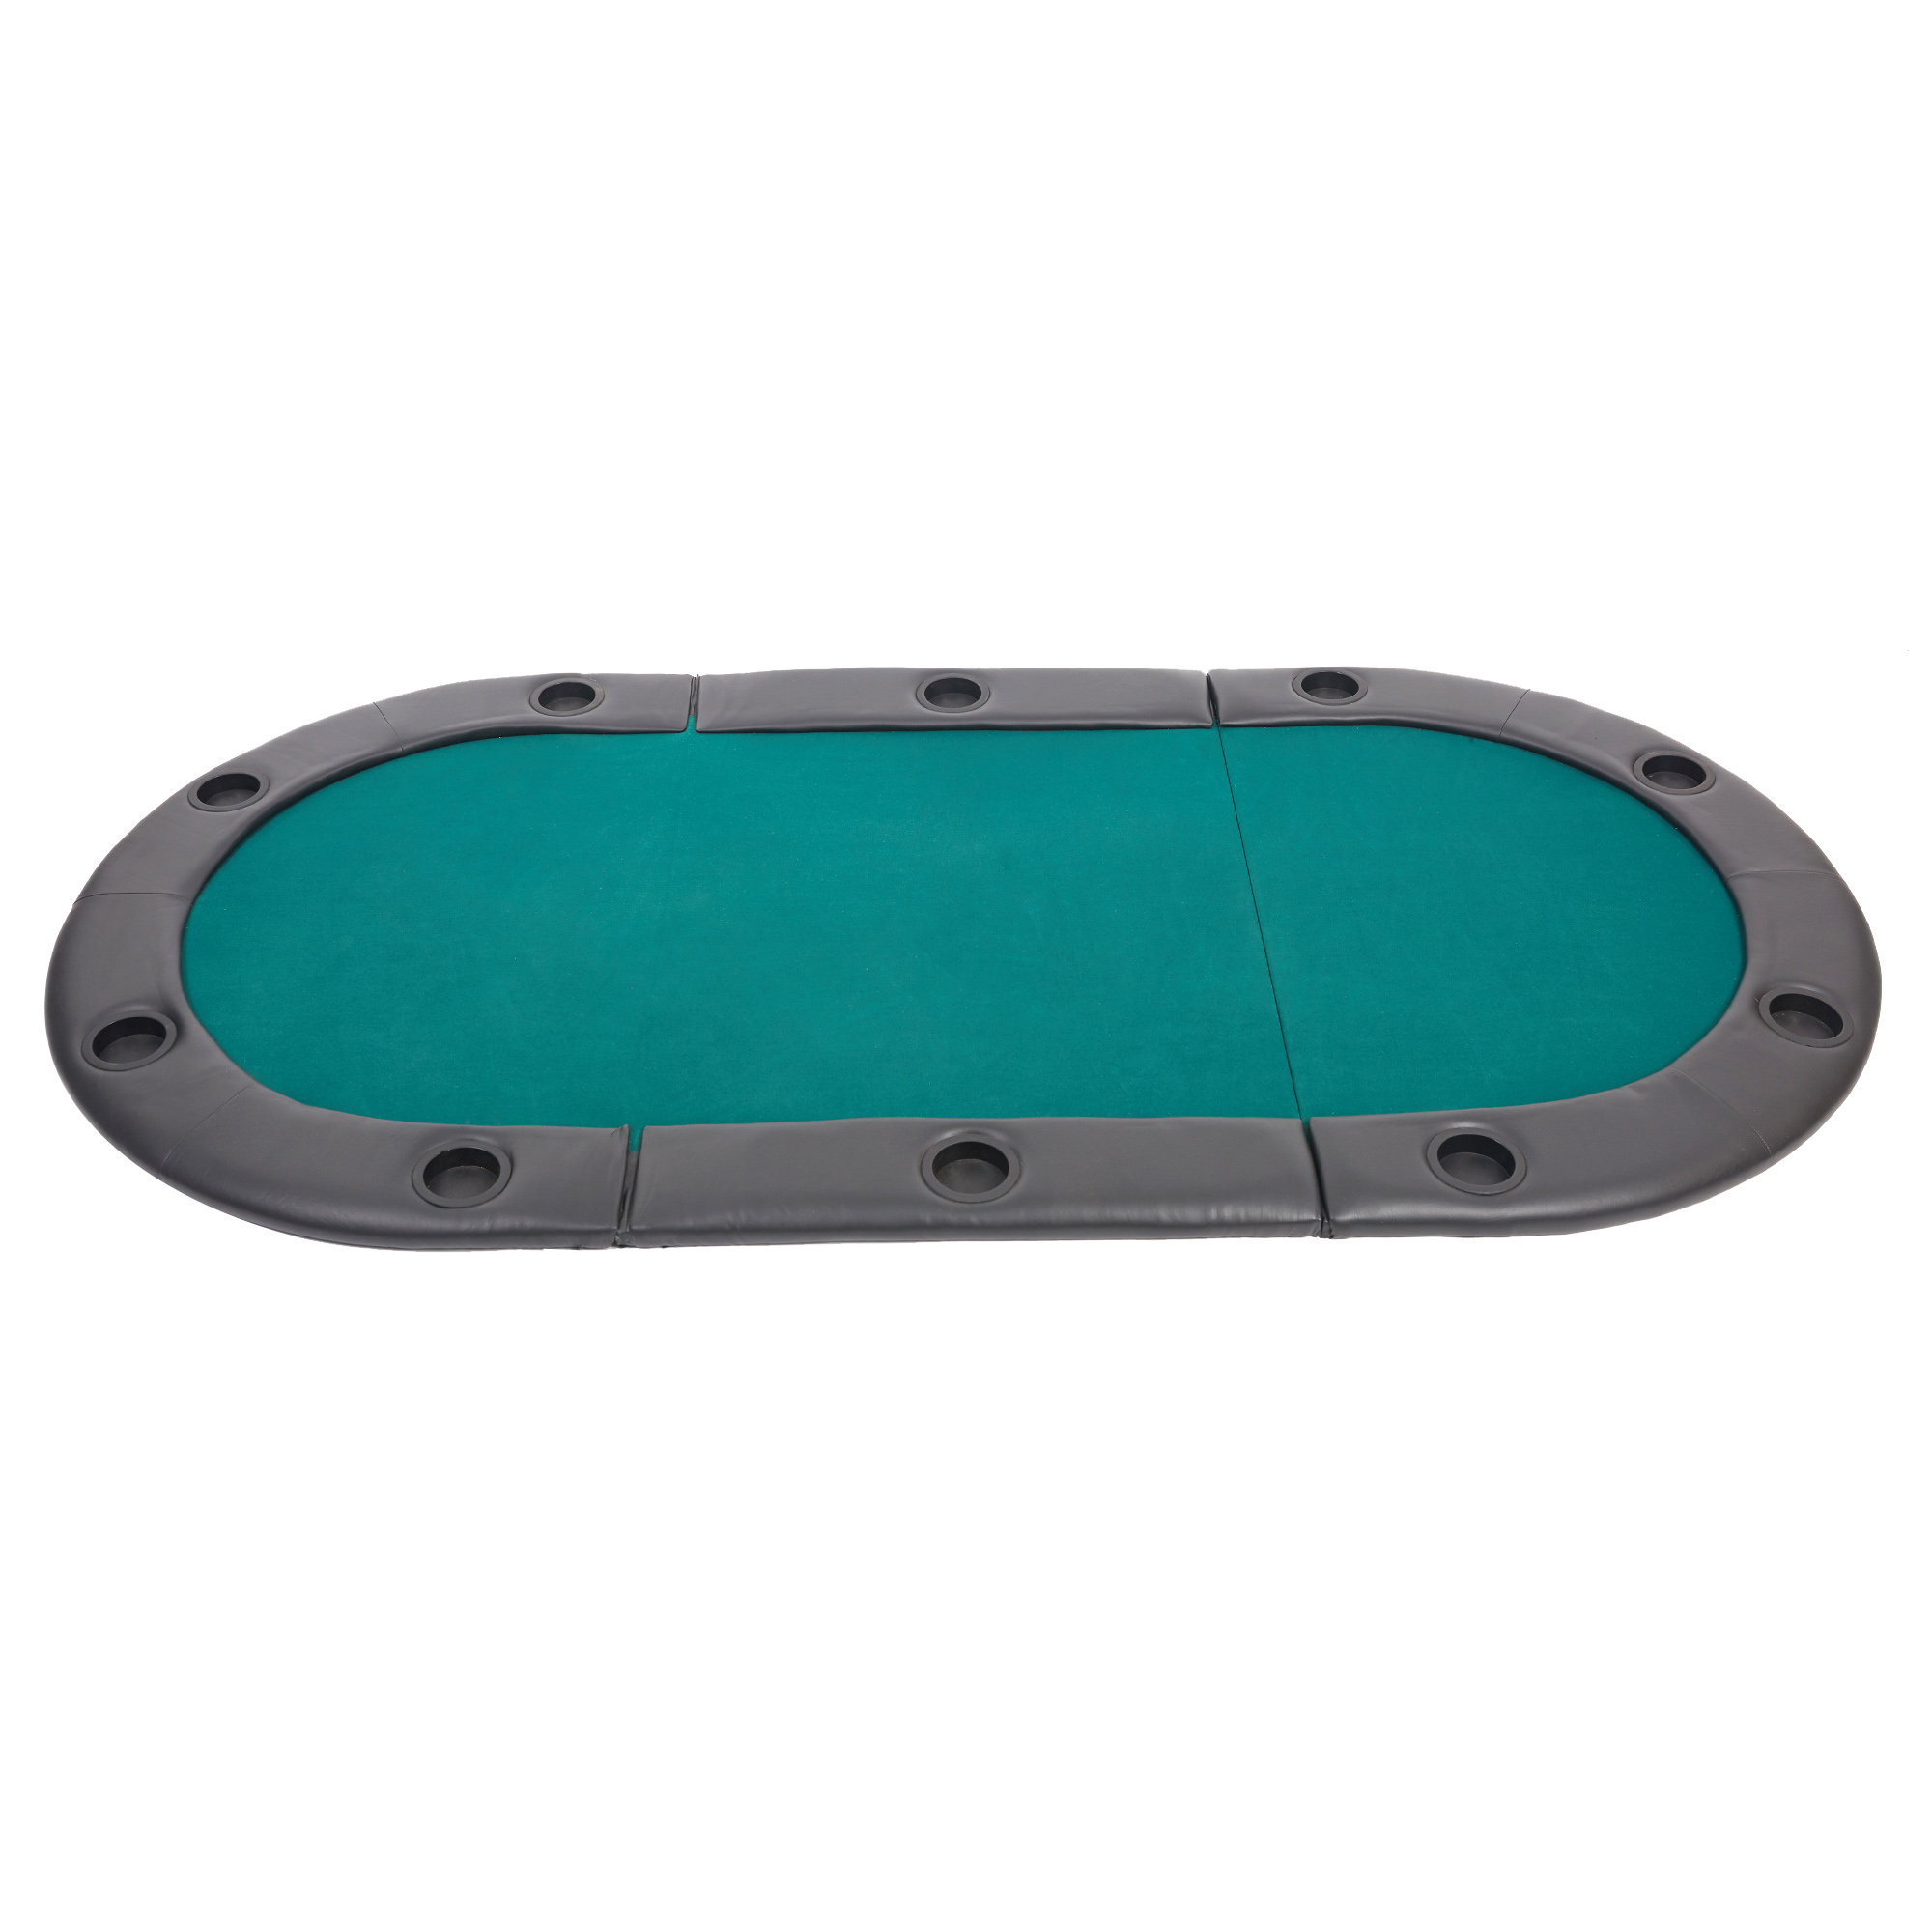 KARMAS PRODUCT 82 inch 3 Folding Poker Table Top 10 Players Casino Blackjack Game Oval Padded Poker Table Layout with Cup Holders, Green - image 1 of 1